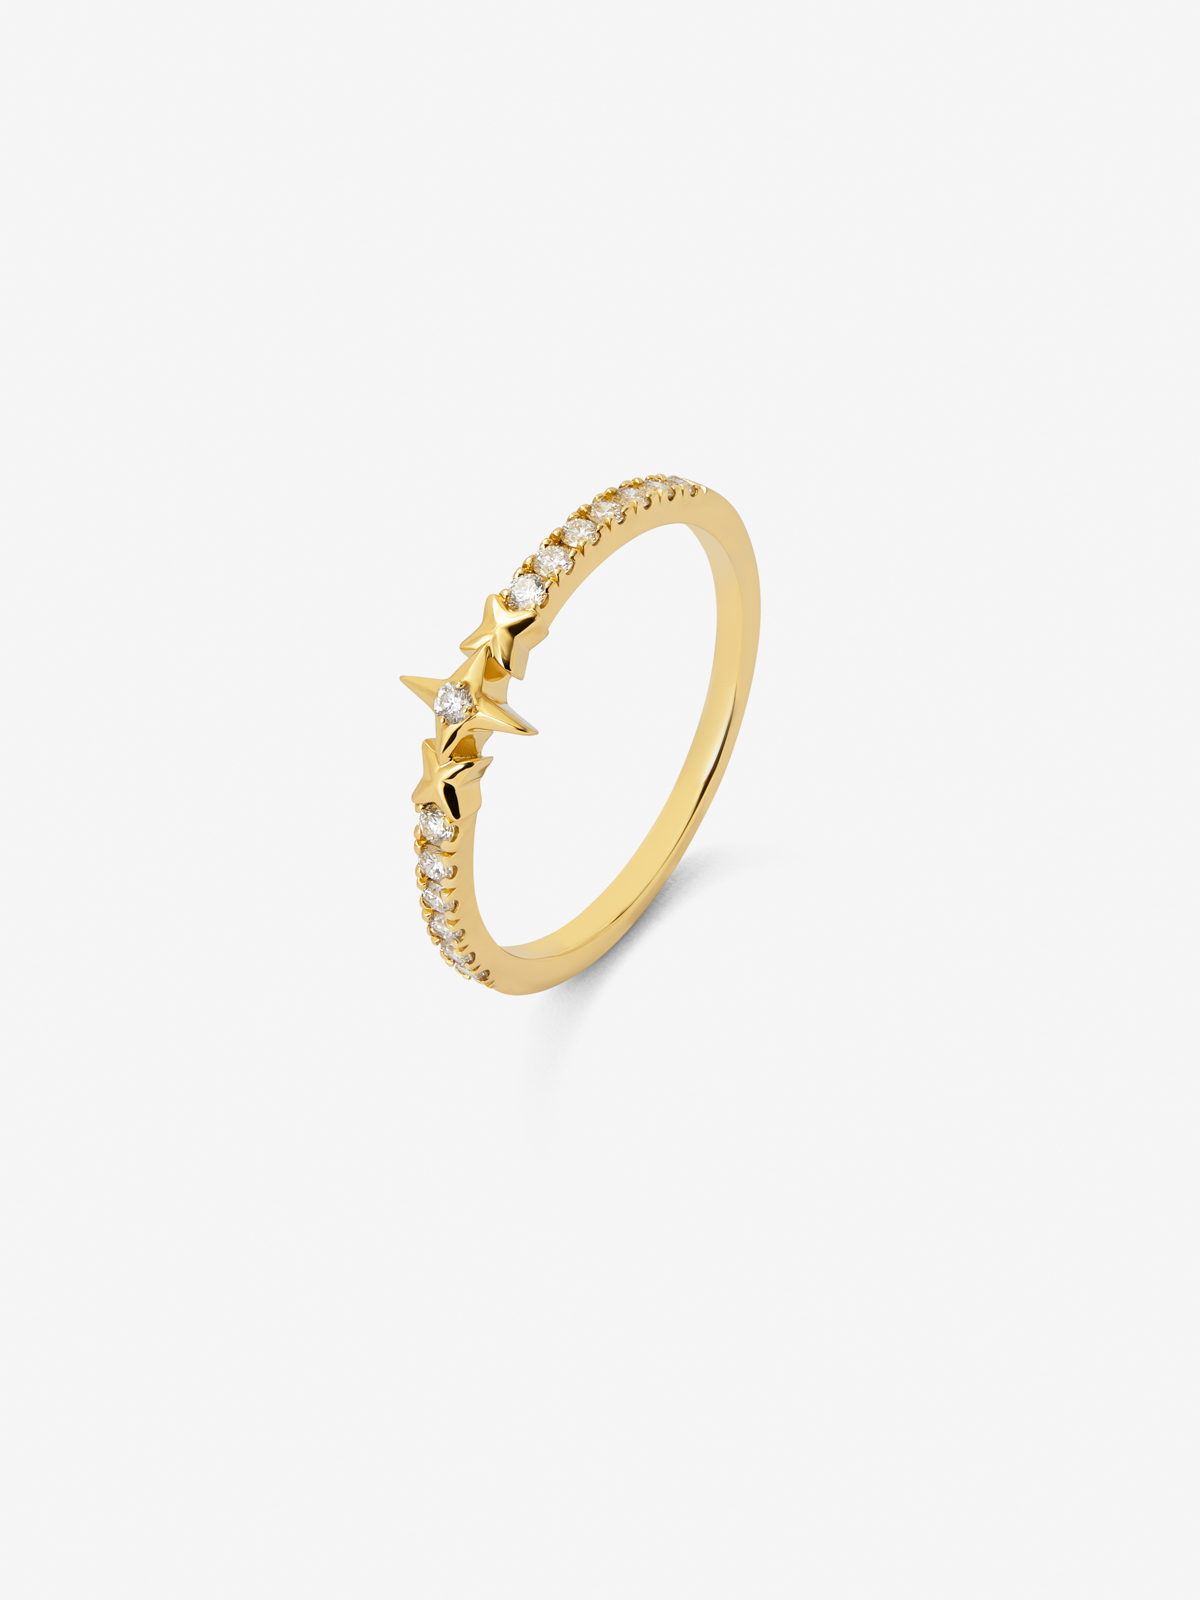 18K yellow gold ring with 15 brilliant-cut diamonds with a total of 0.22 cts